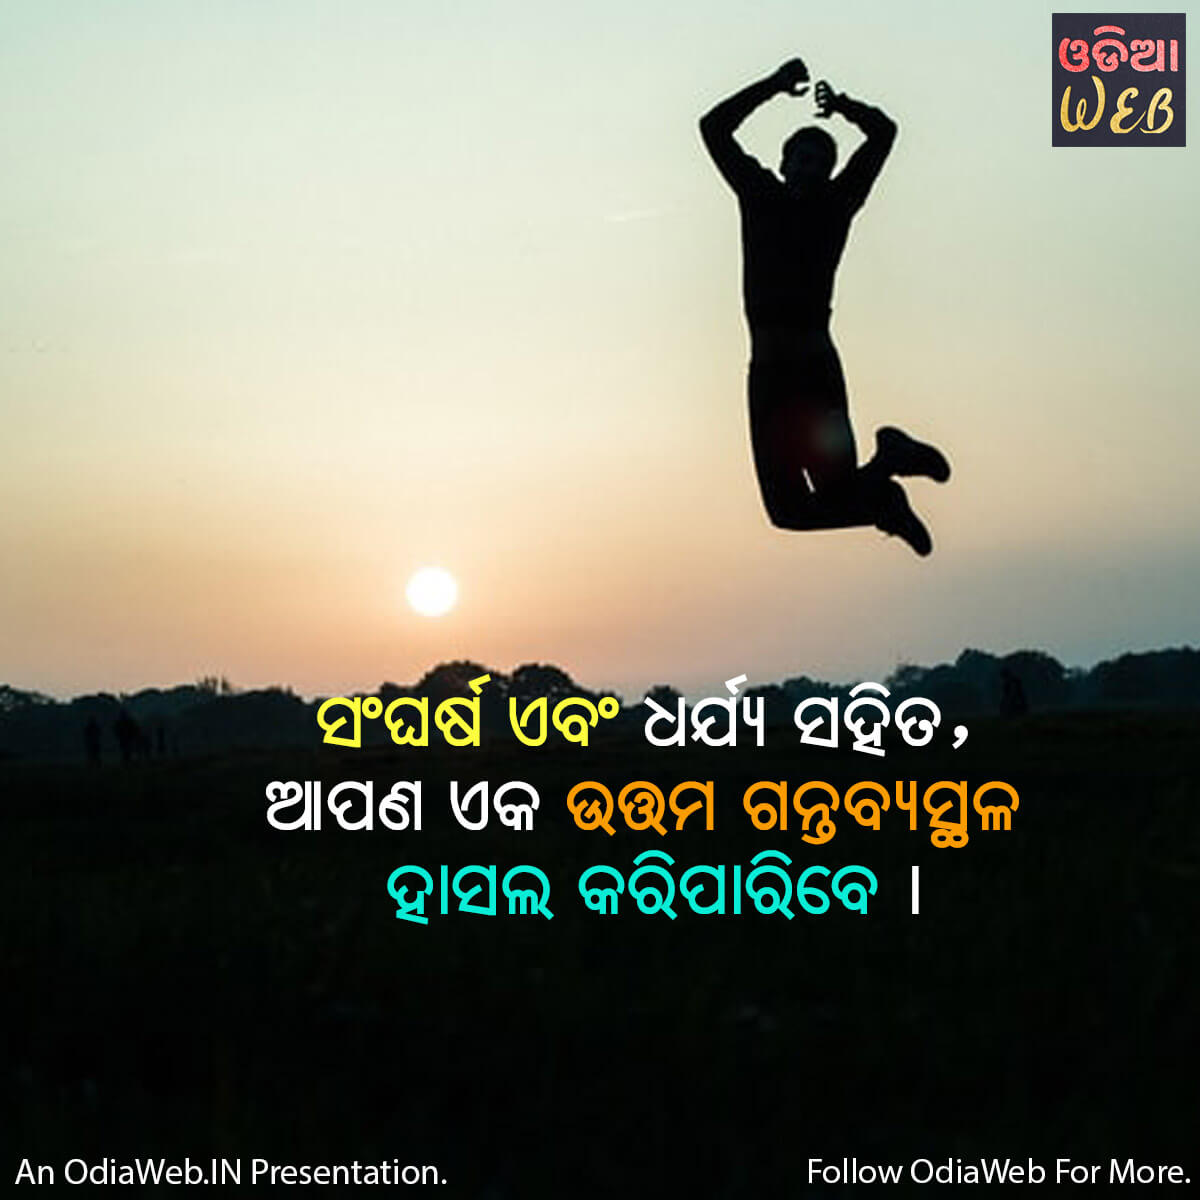 Odia Motivational Quotes6